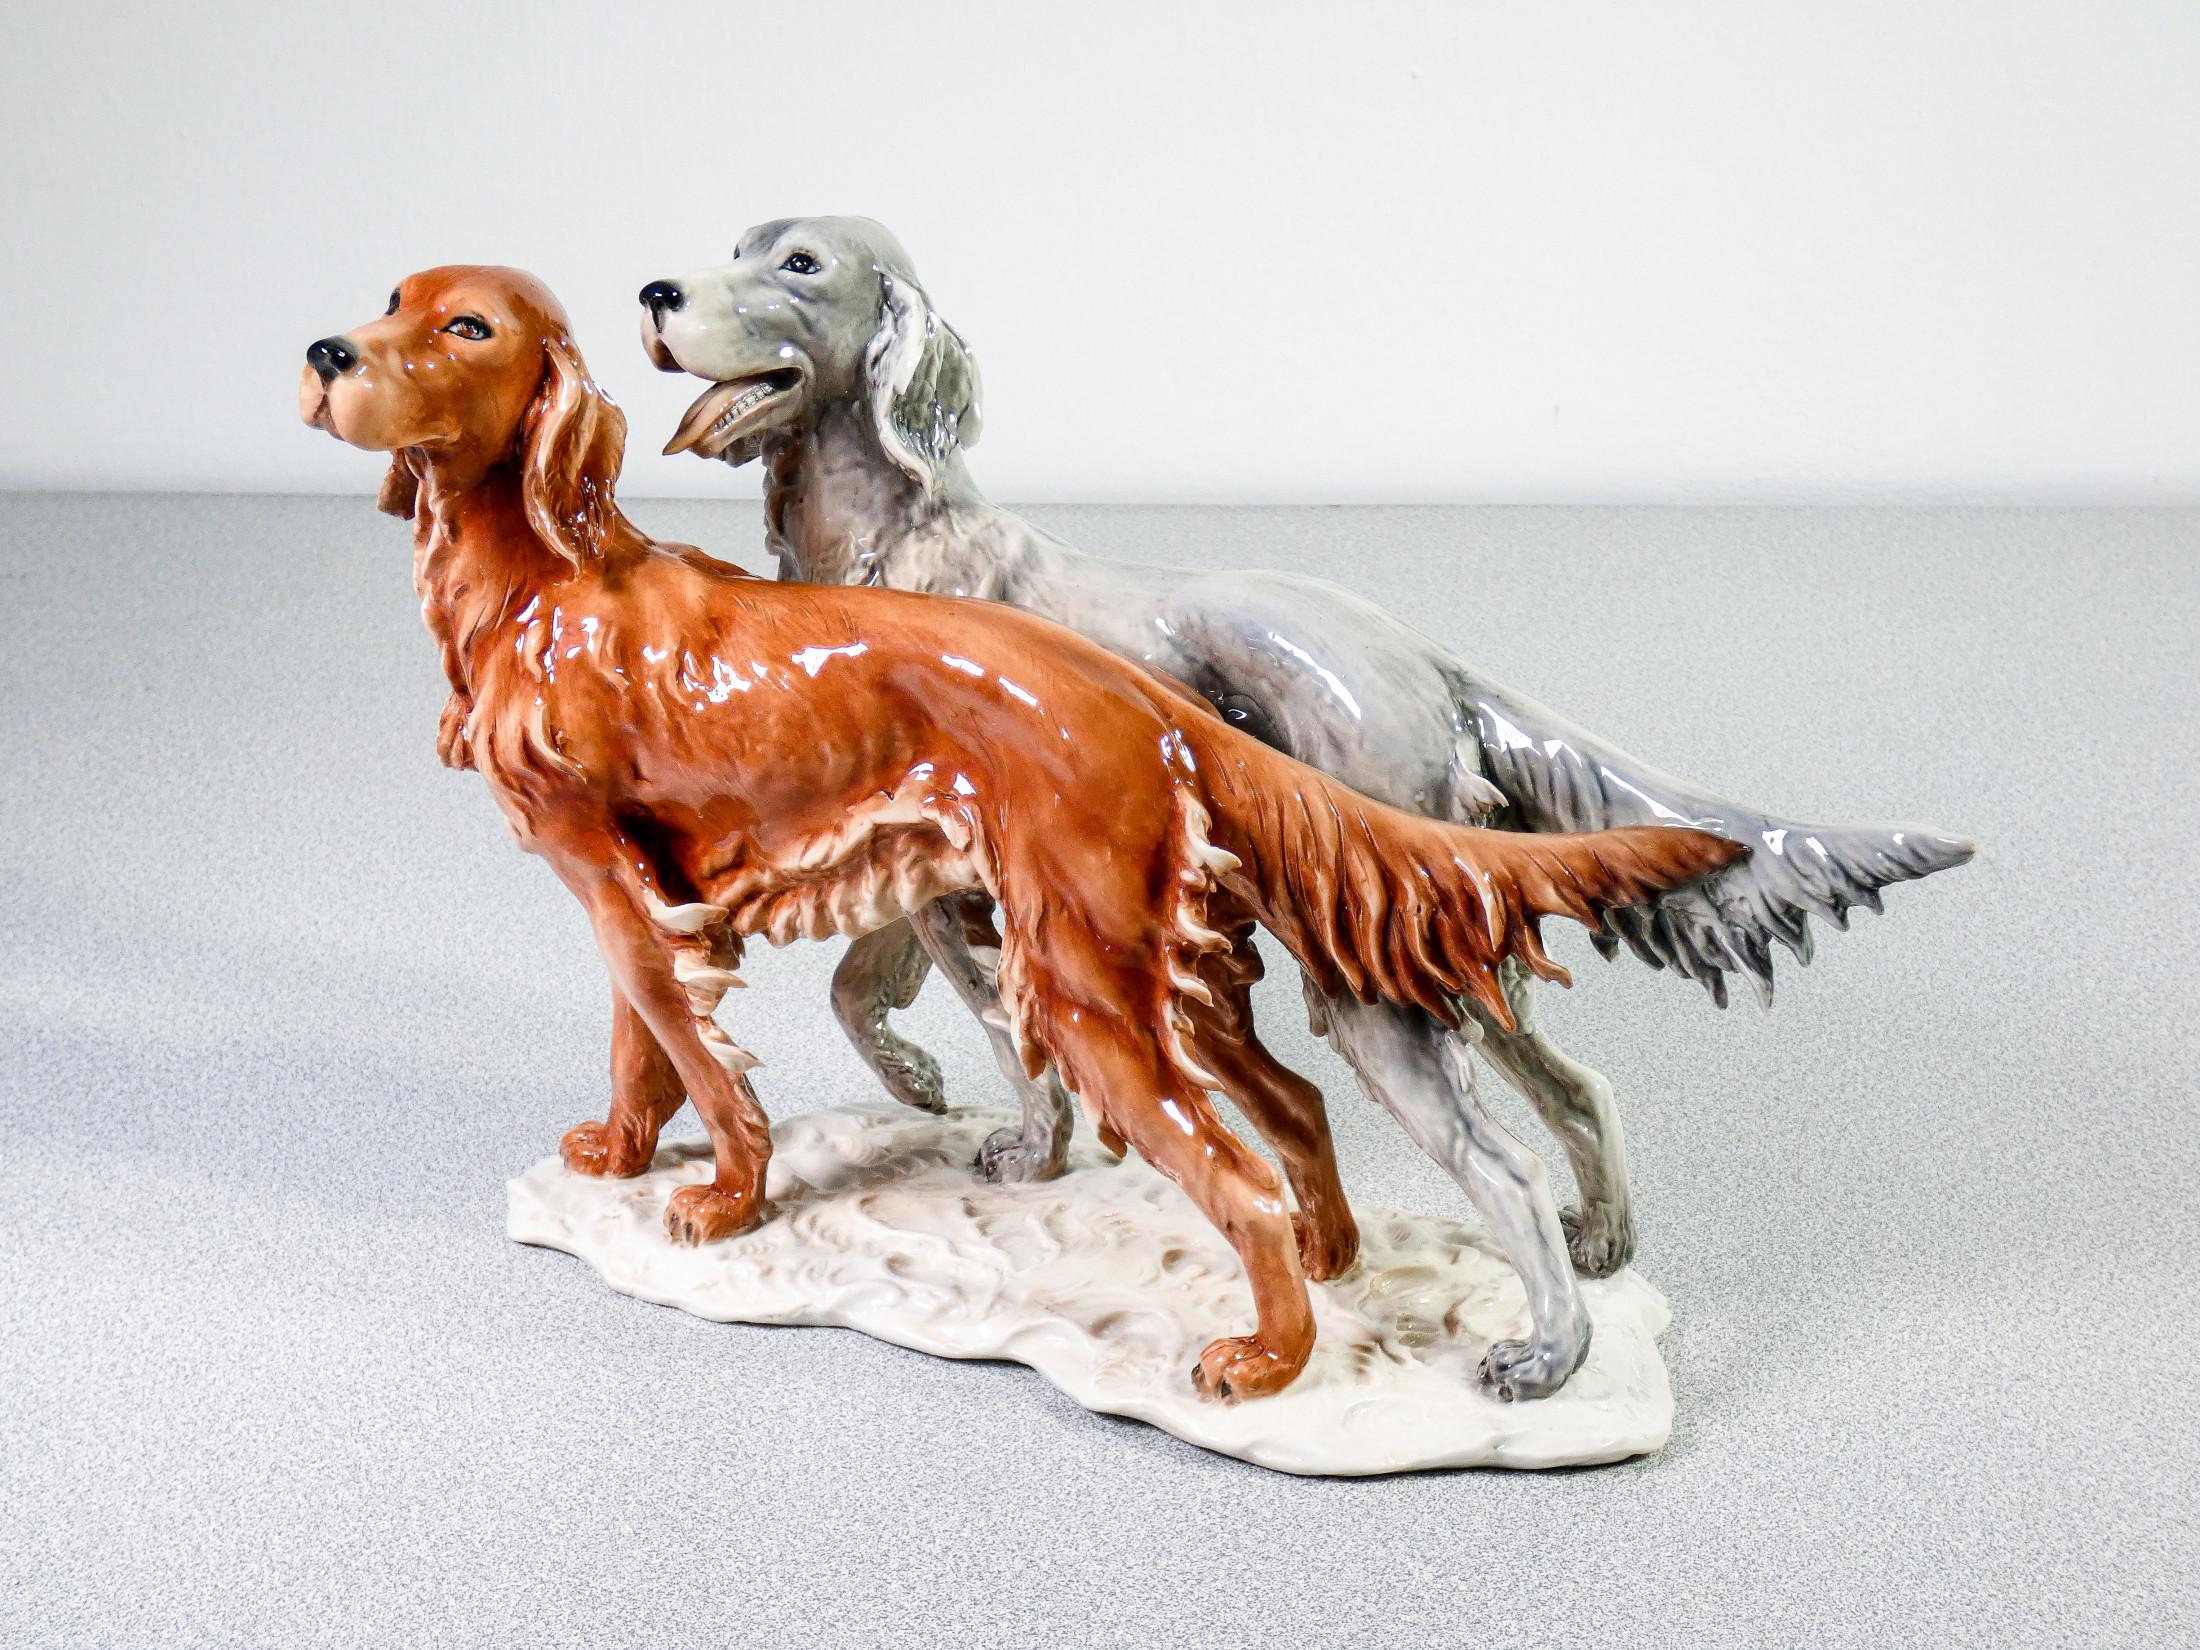 Painted and glazed ceramic sculpture
signed Giuseppe GRANELLO
for CACCIAPUOTI.
Pair of setters.

ORIGIN
Italy

PERIOD
1930s

AUTHOR
Giuseppe GRANELLO
Ceramist active from the second half of the 1920s at the ceramic factory 'Cacciapuoti